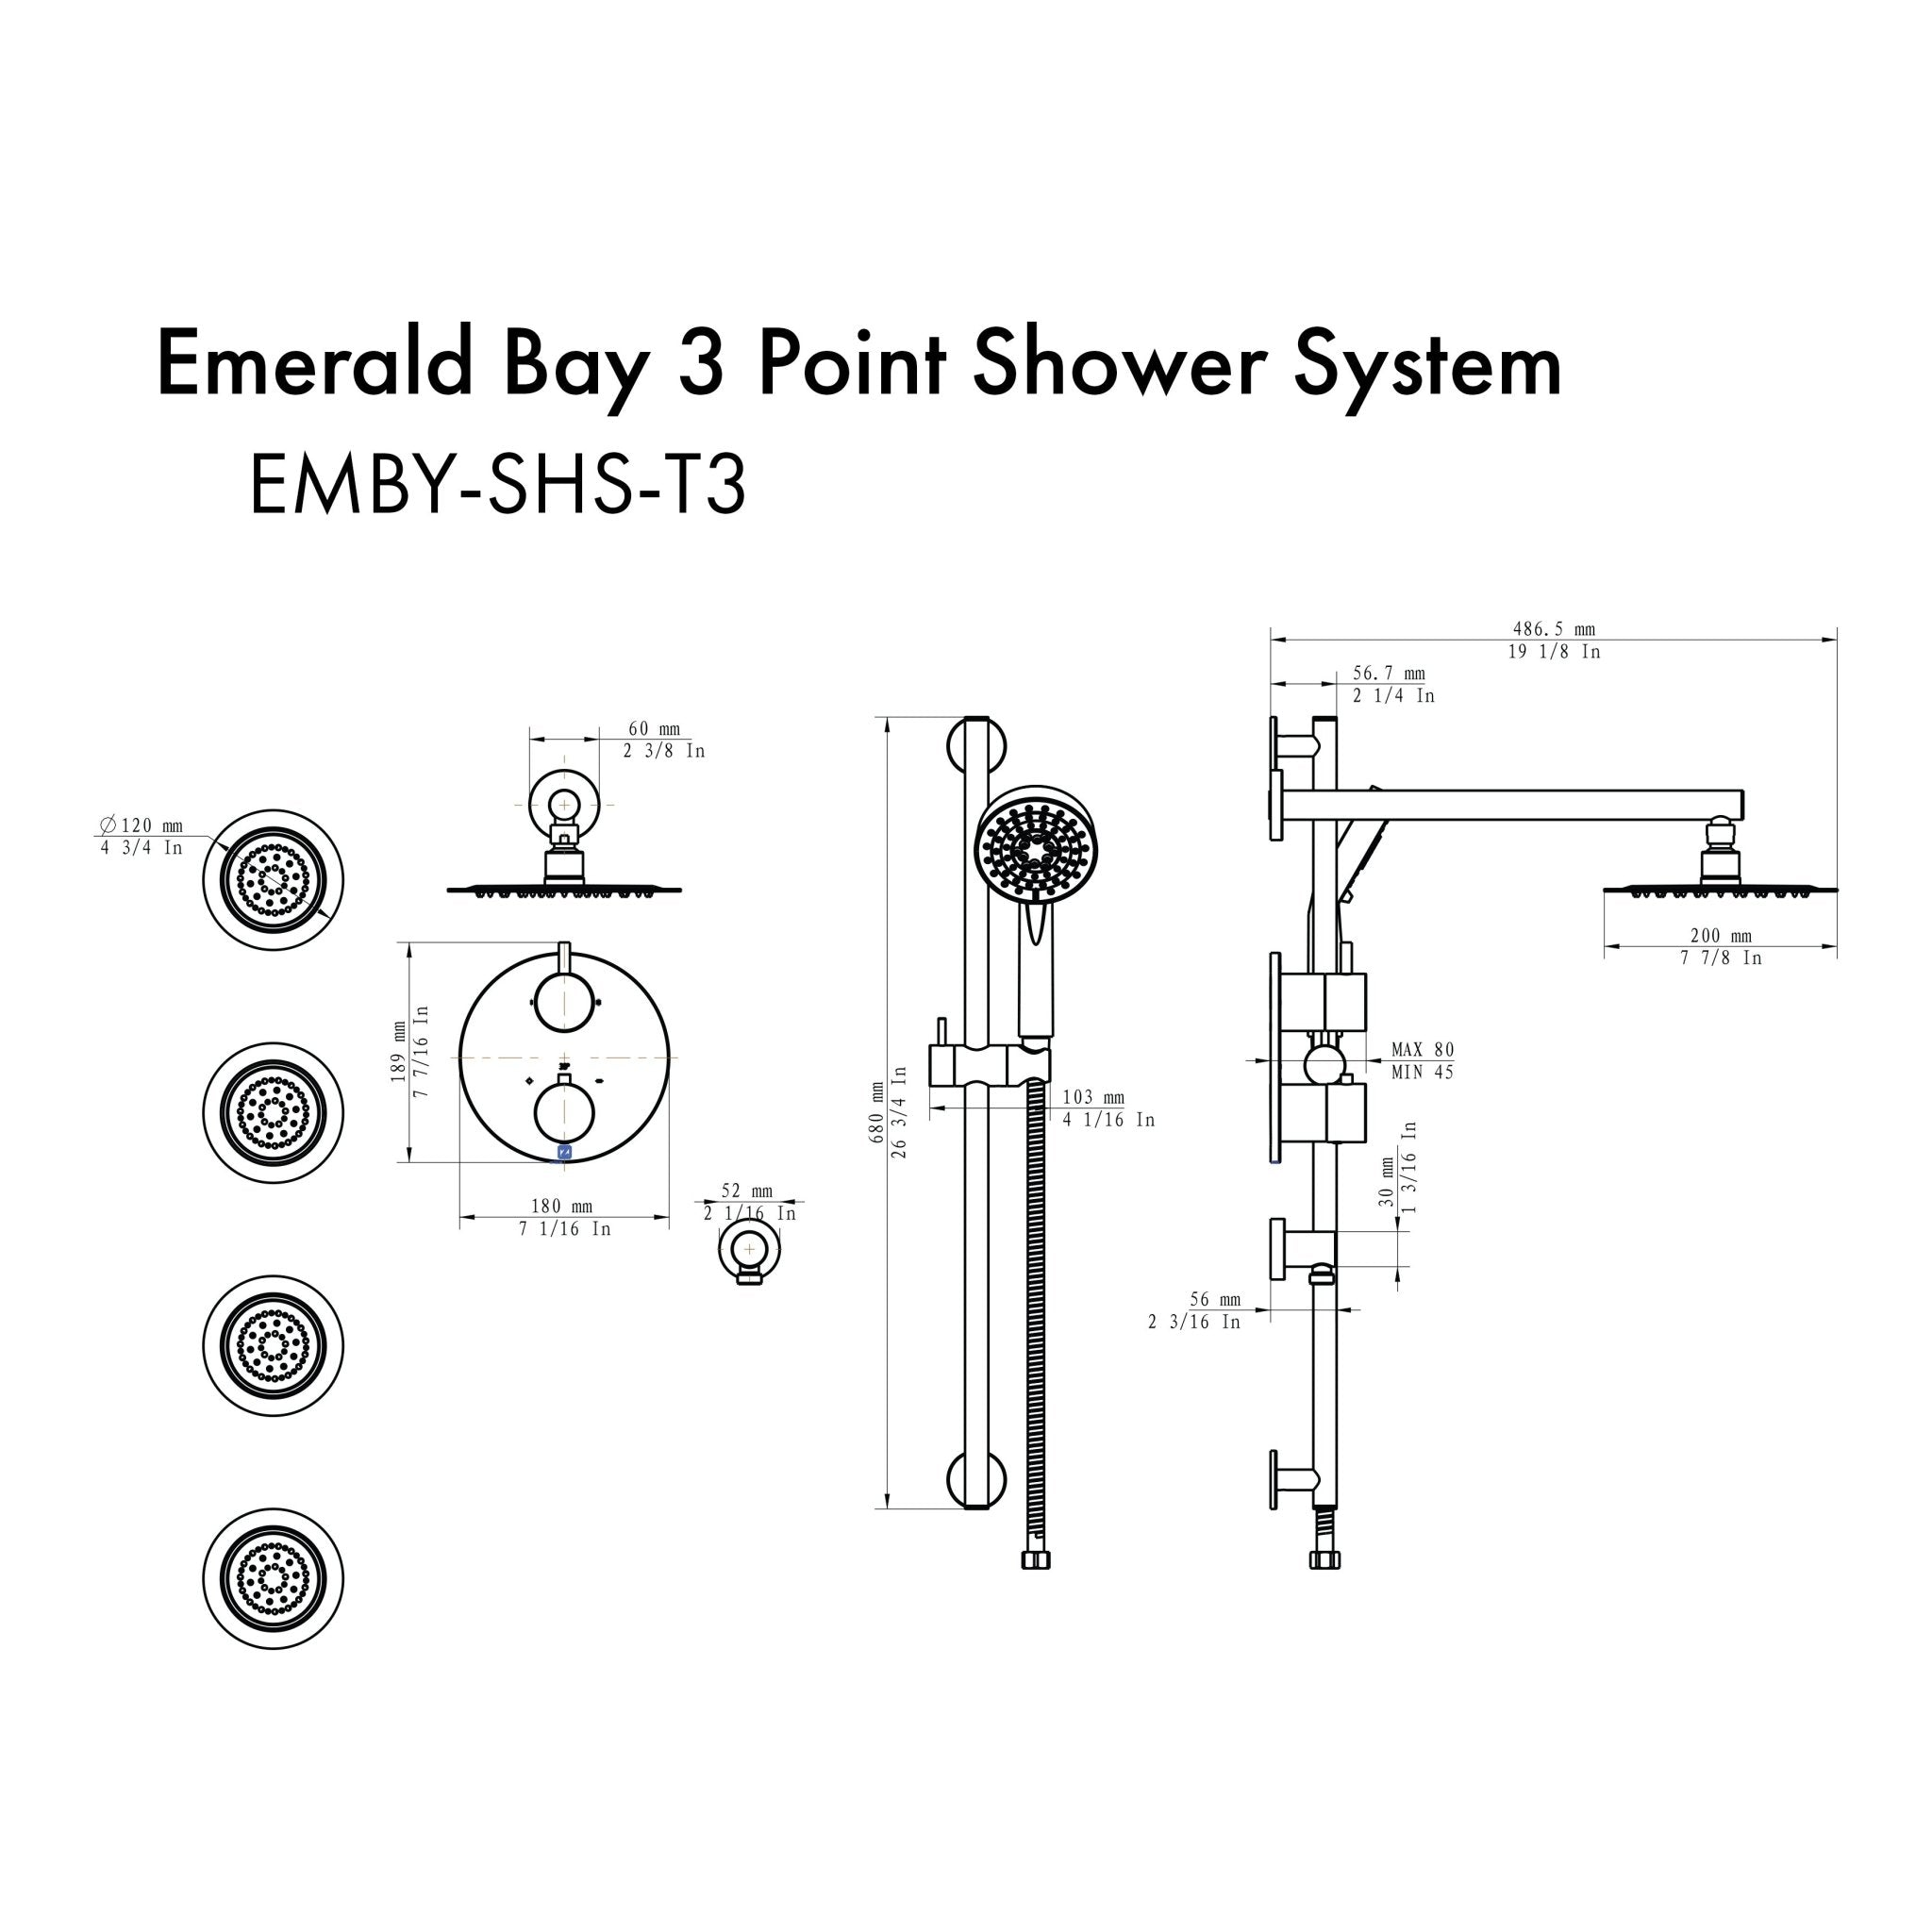 ZLINE Emerald Bay Thermostatic Shower System with Body Jets (EMBY-SHS-T3) dimensional diagram